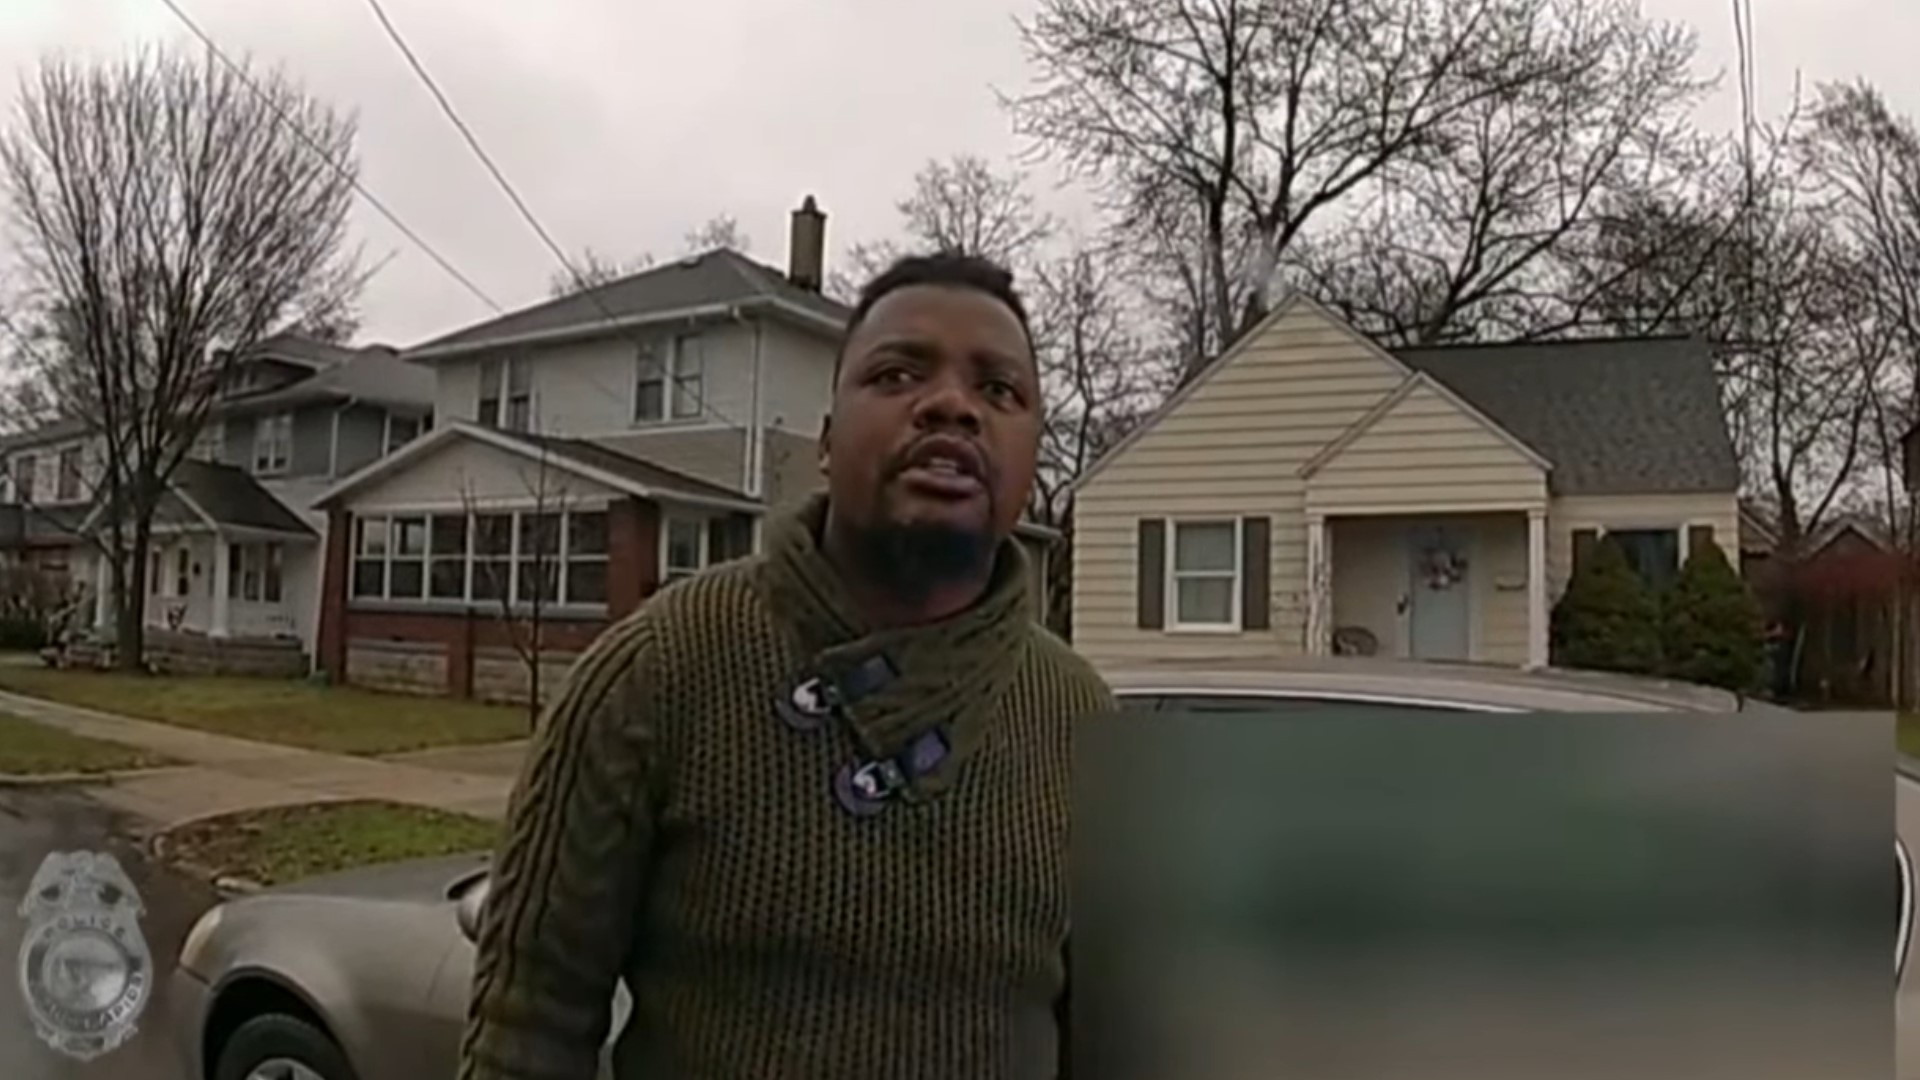 Graphic Warning: Body camera video provided by the Grand Rapids Police Department shows the police stop that lead to the fatal shooting of Patrick Lyoya.